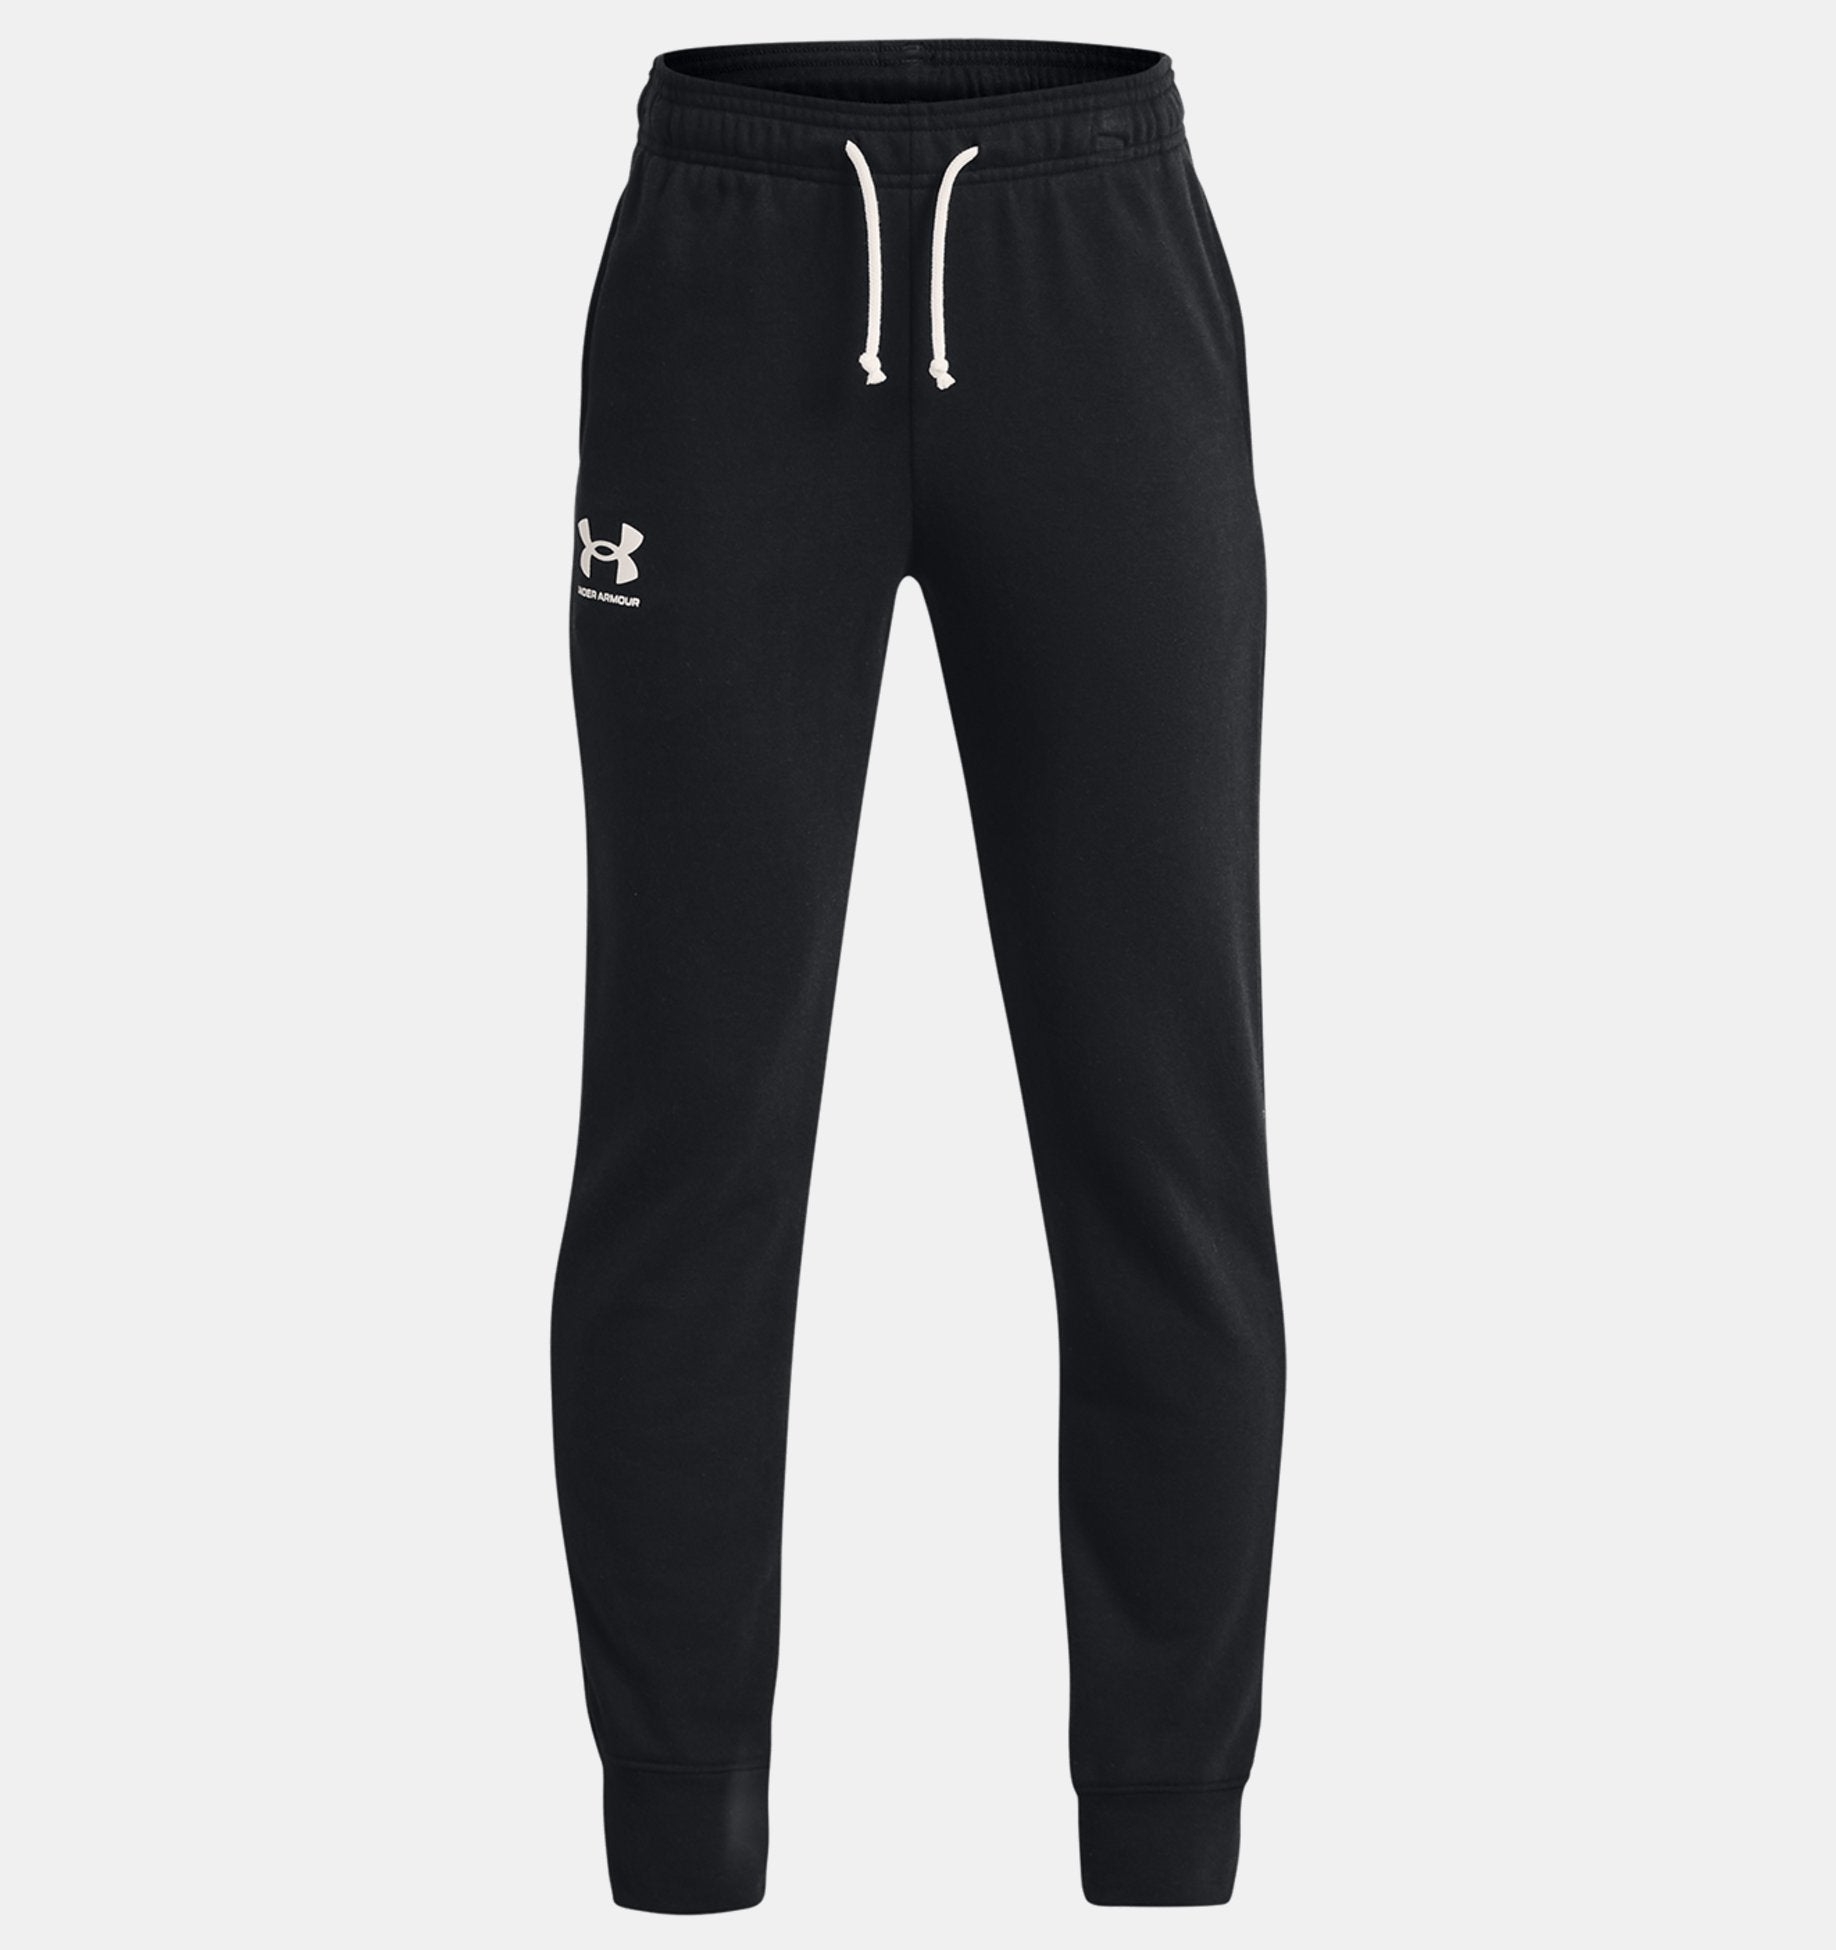 Under Armour Boys' Rival Terry Joggers Apparel Under Armour Black/Onyx White-001 Small 